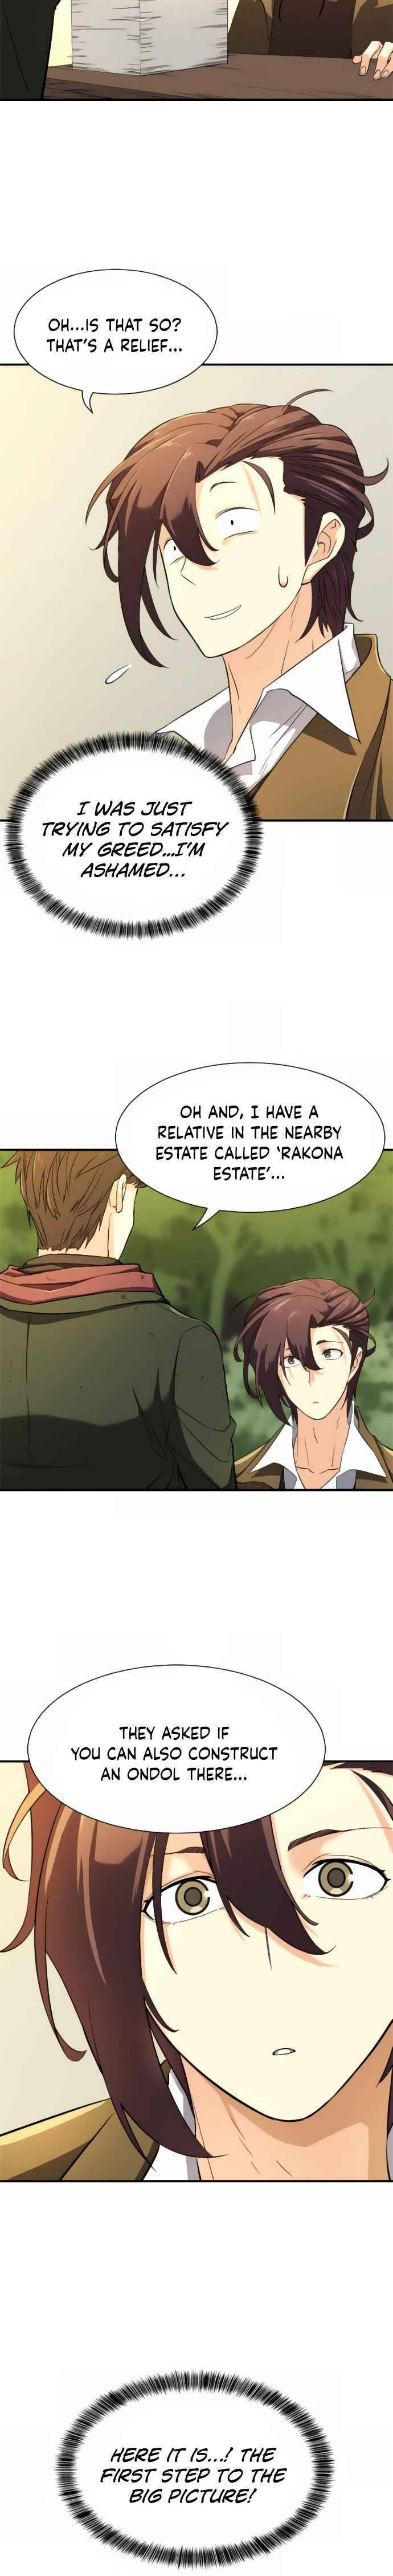 The Greatest Estate Developer Chapter 9 page 11